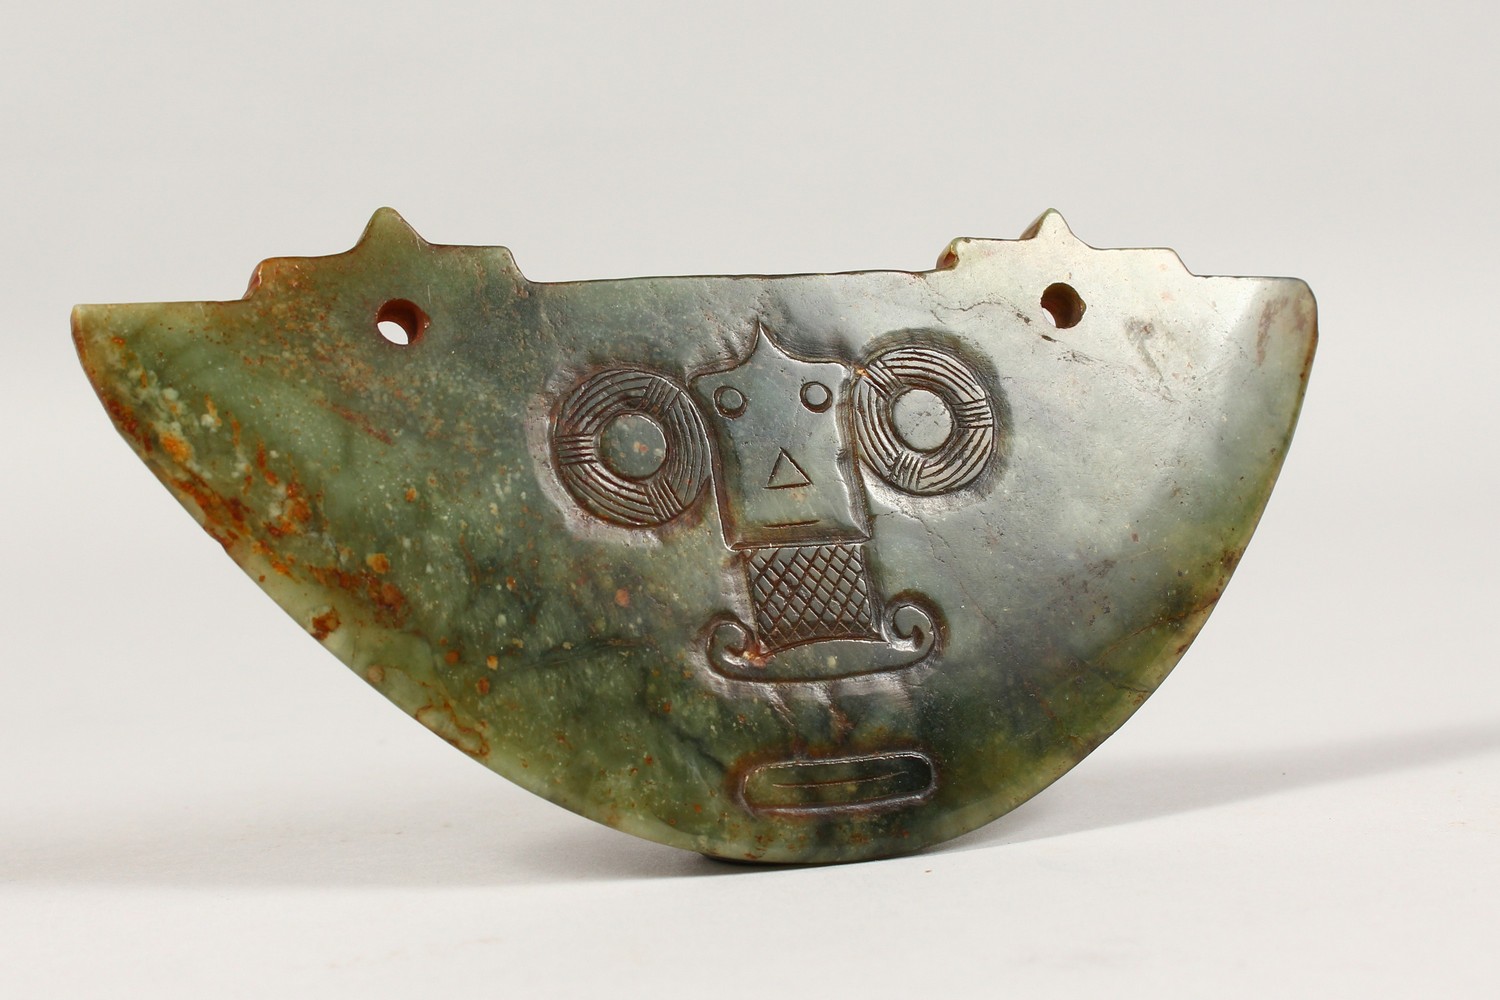 A LIANGZHU CULTURE JADE HUANG PENDANT, with incised decoration. 6ins wide.